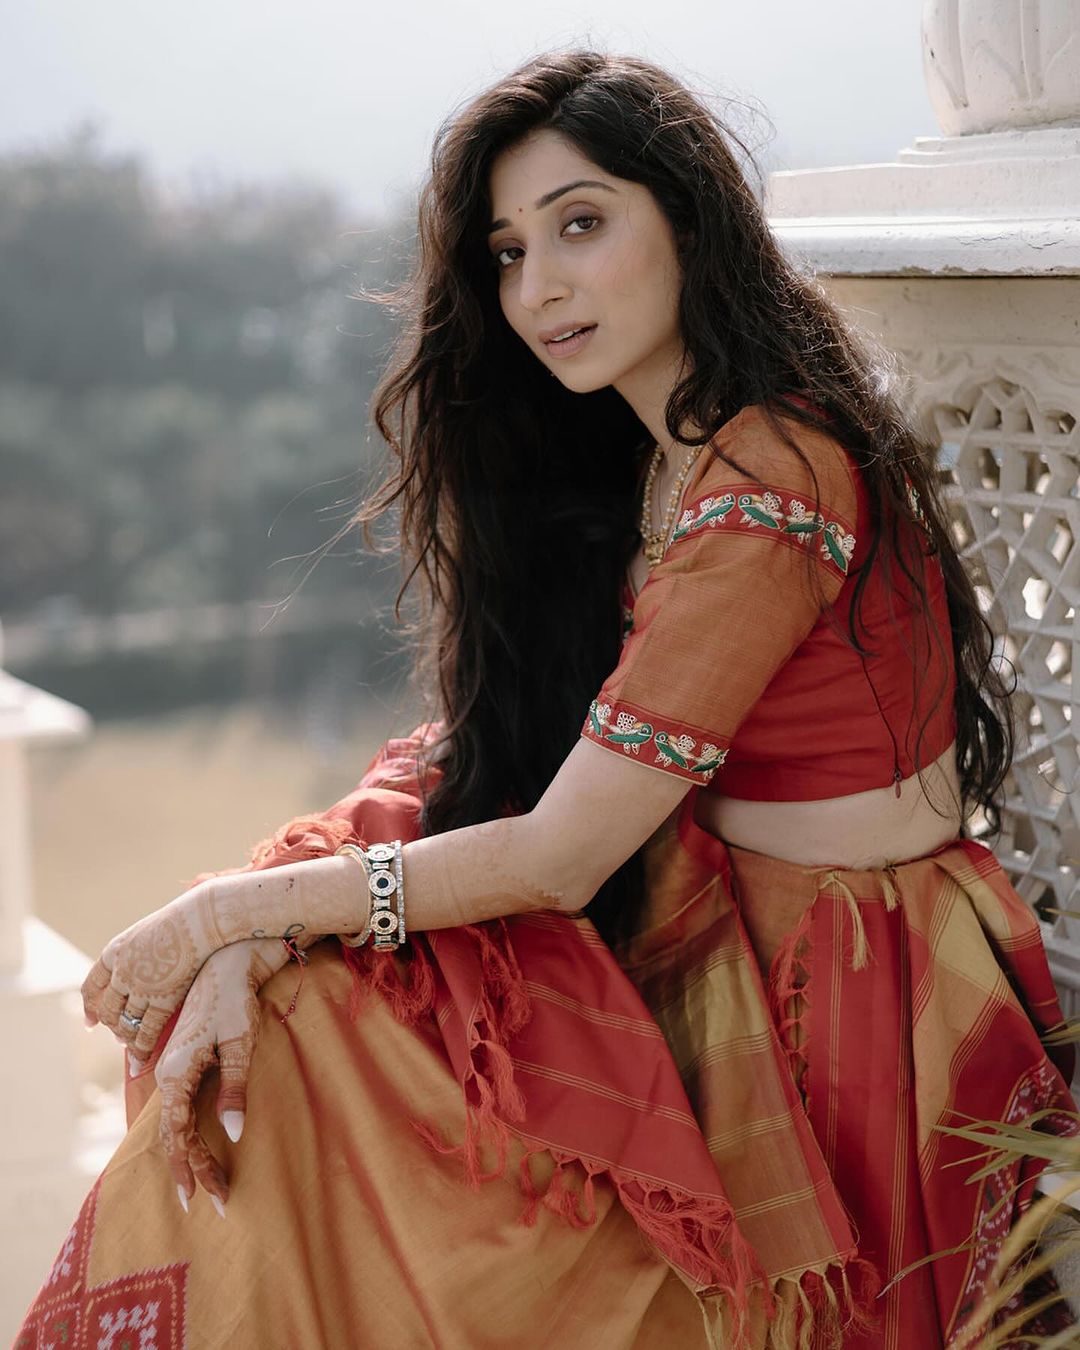 International Dance Day: Actress And Dancer Vrushika Mehta Says That Dance Acts As Her Biggest Stress Buster. Look What She Further Adds!